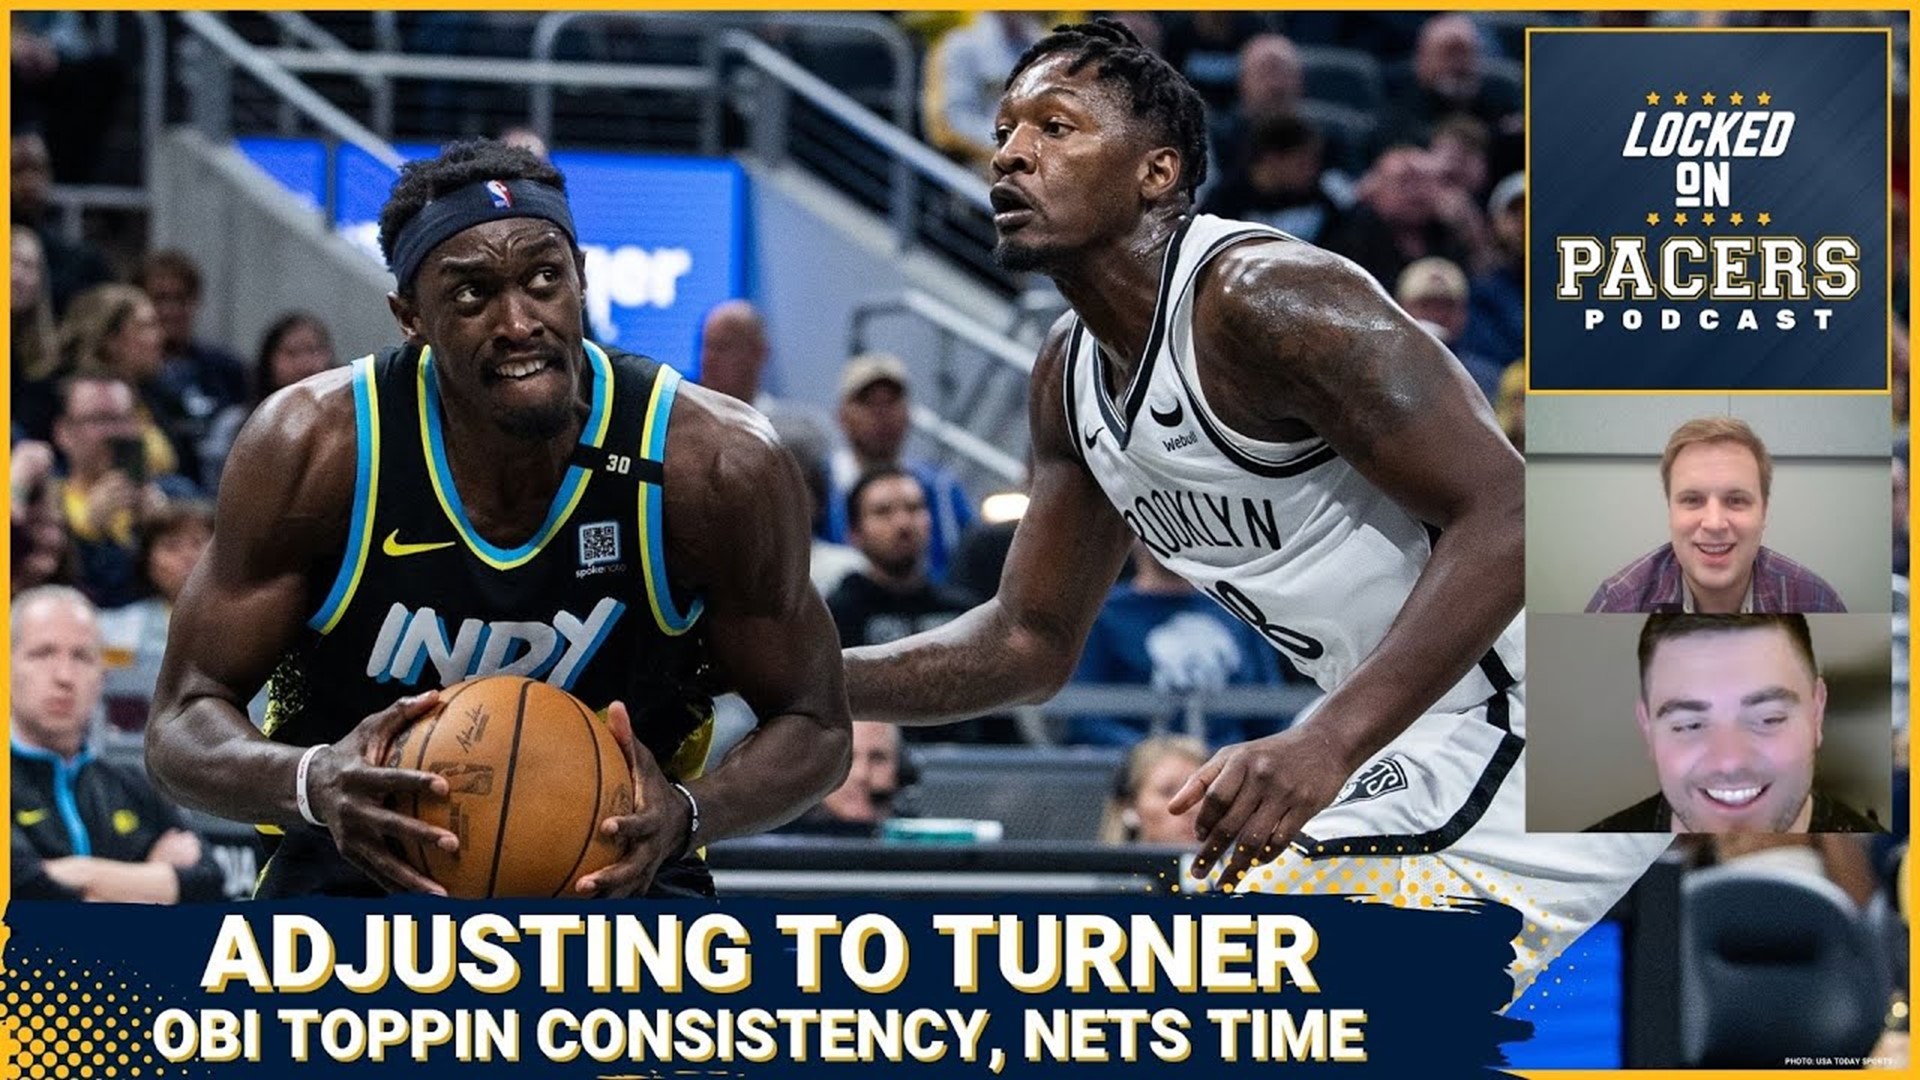 Myles Turner dislocated finger, Obi Toppin's consistency, Can Indiana Pacers start a win streak?